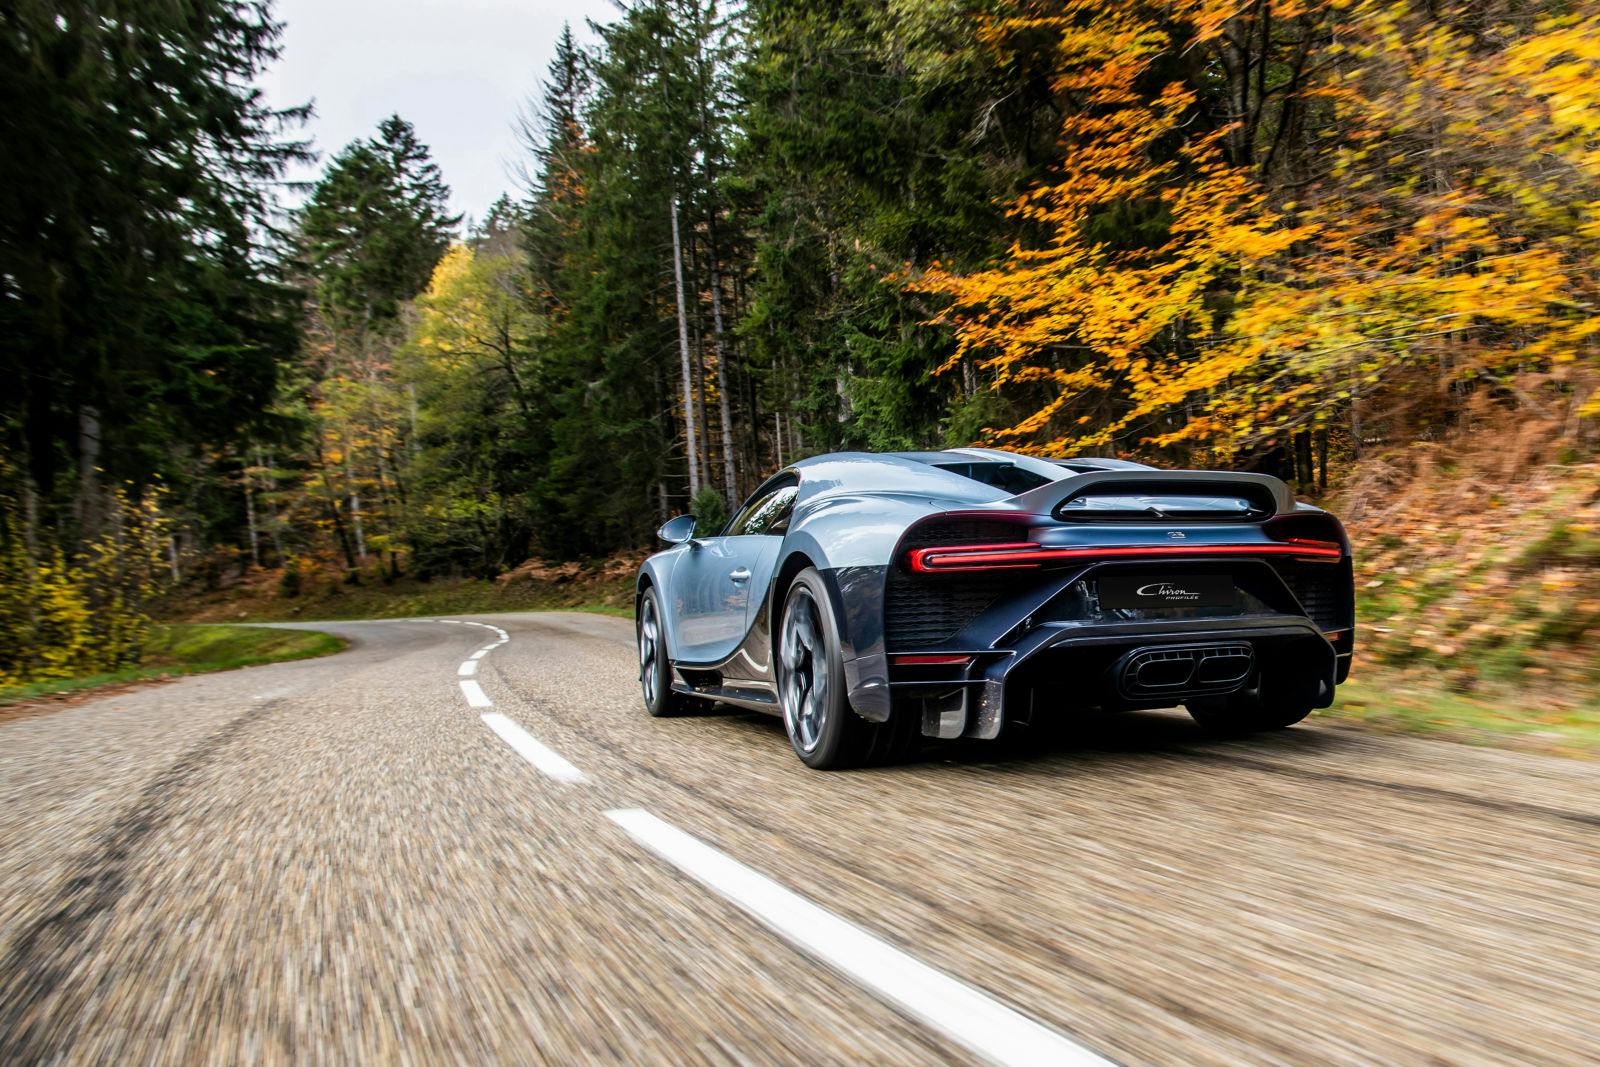 Like the Chiron Pur Sport, the Chiron Profilée has been designed for lateral grip and ultimate  acceleration.